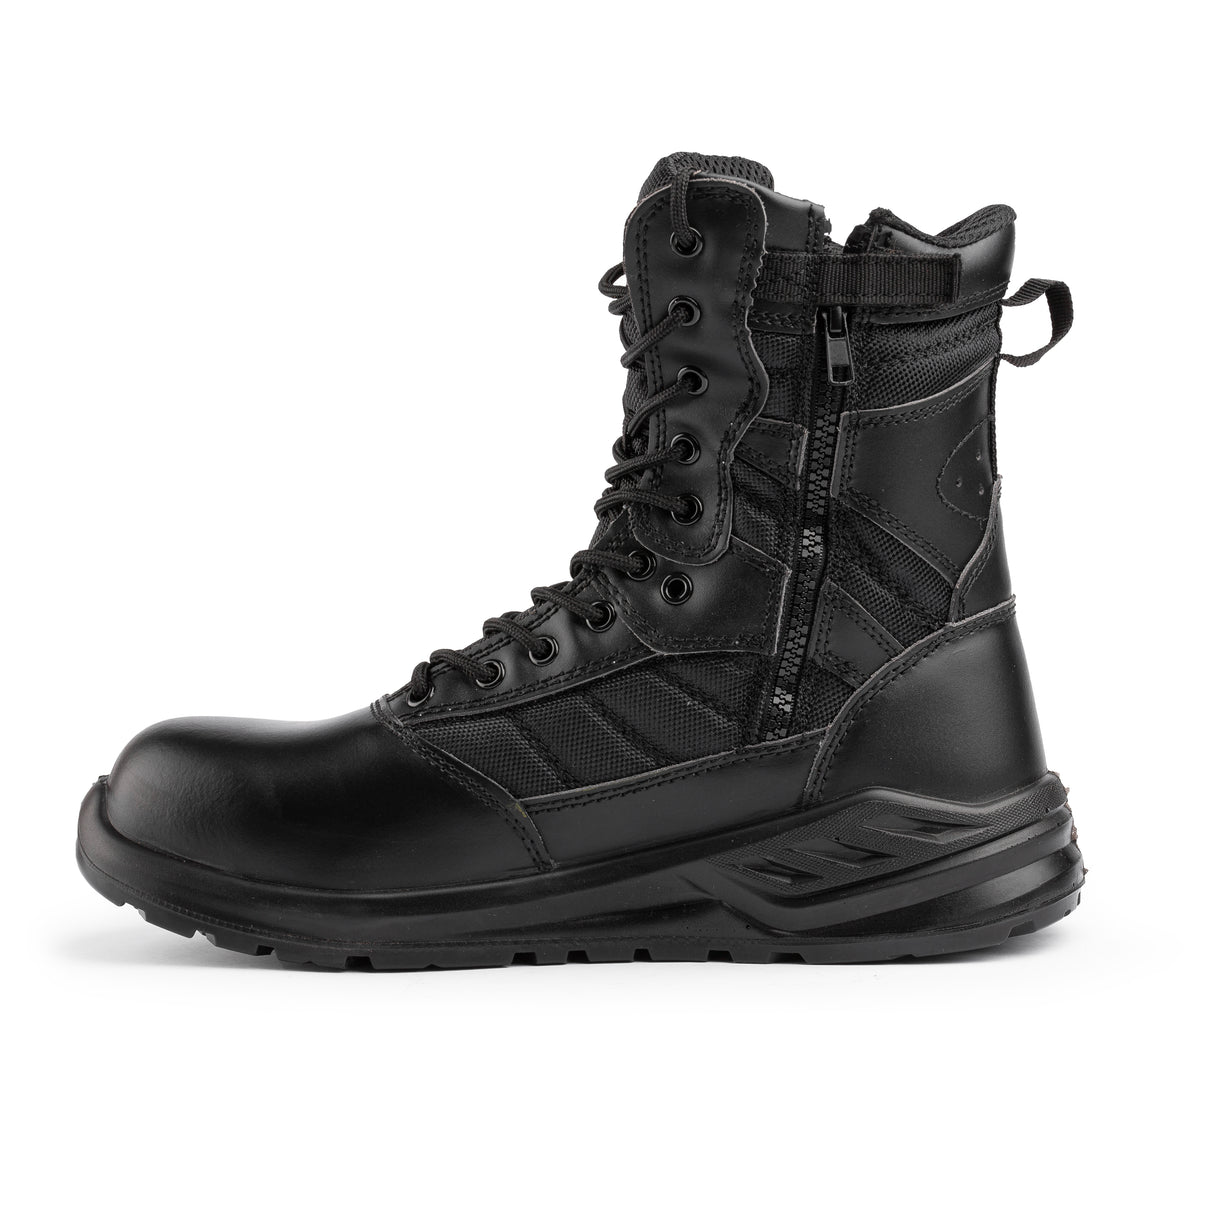 Work Safety Boots with Steel Toe Cap